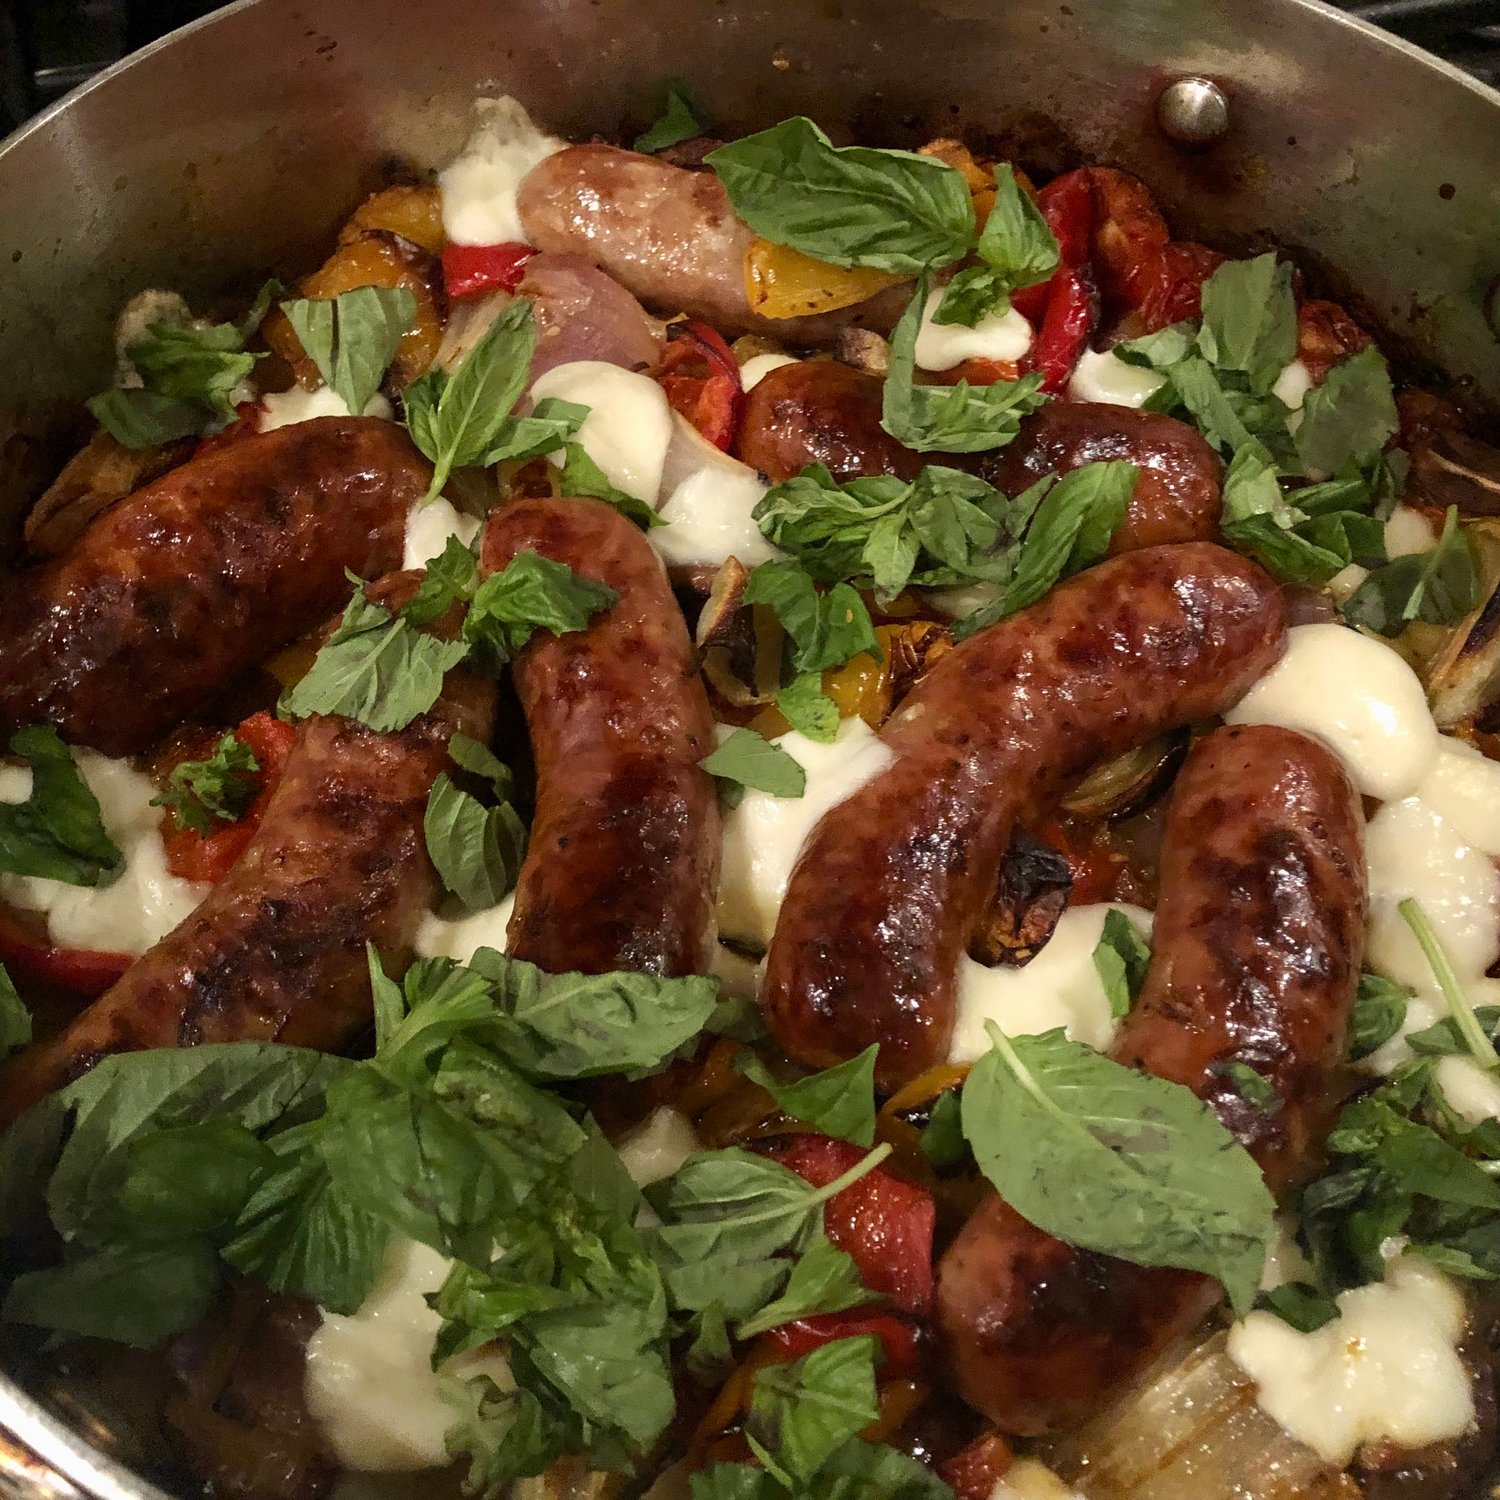 Nothing could be easier to make in winter than this delicious roasted sausage dish with peppers, onions, tomatoes and mozzarella cheese, garnished with basil.